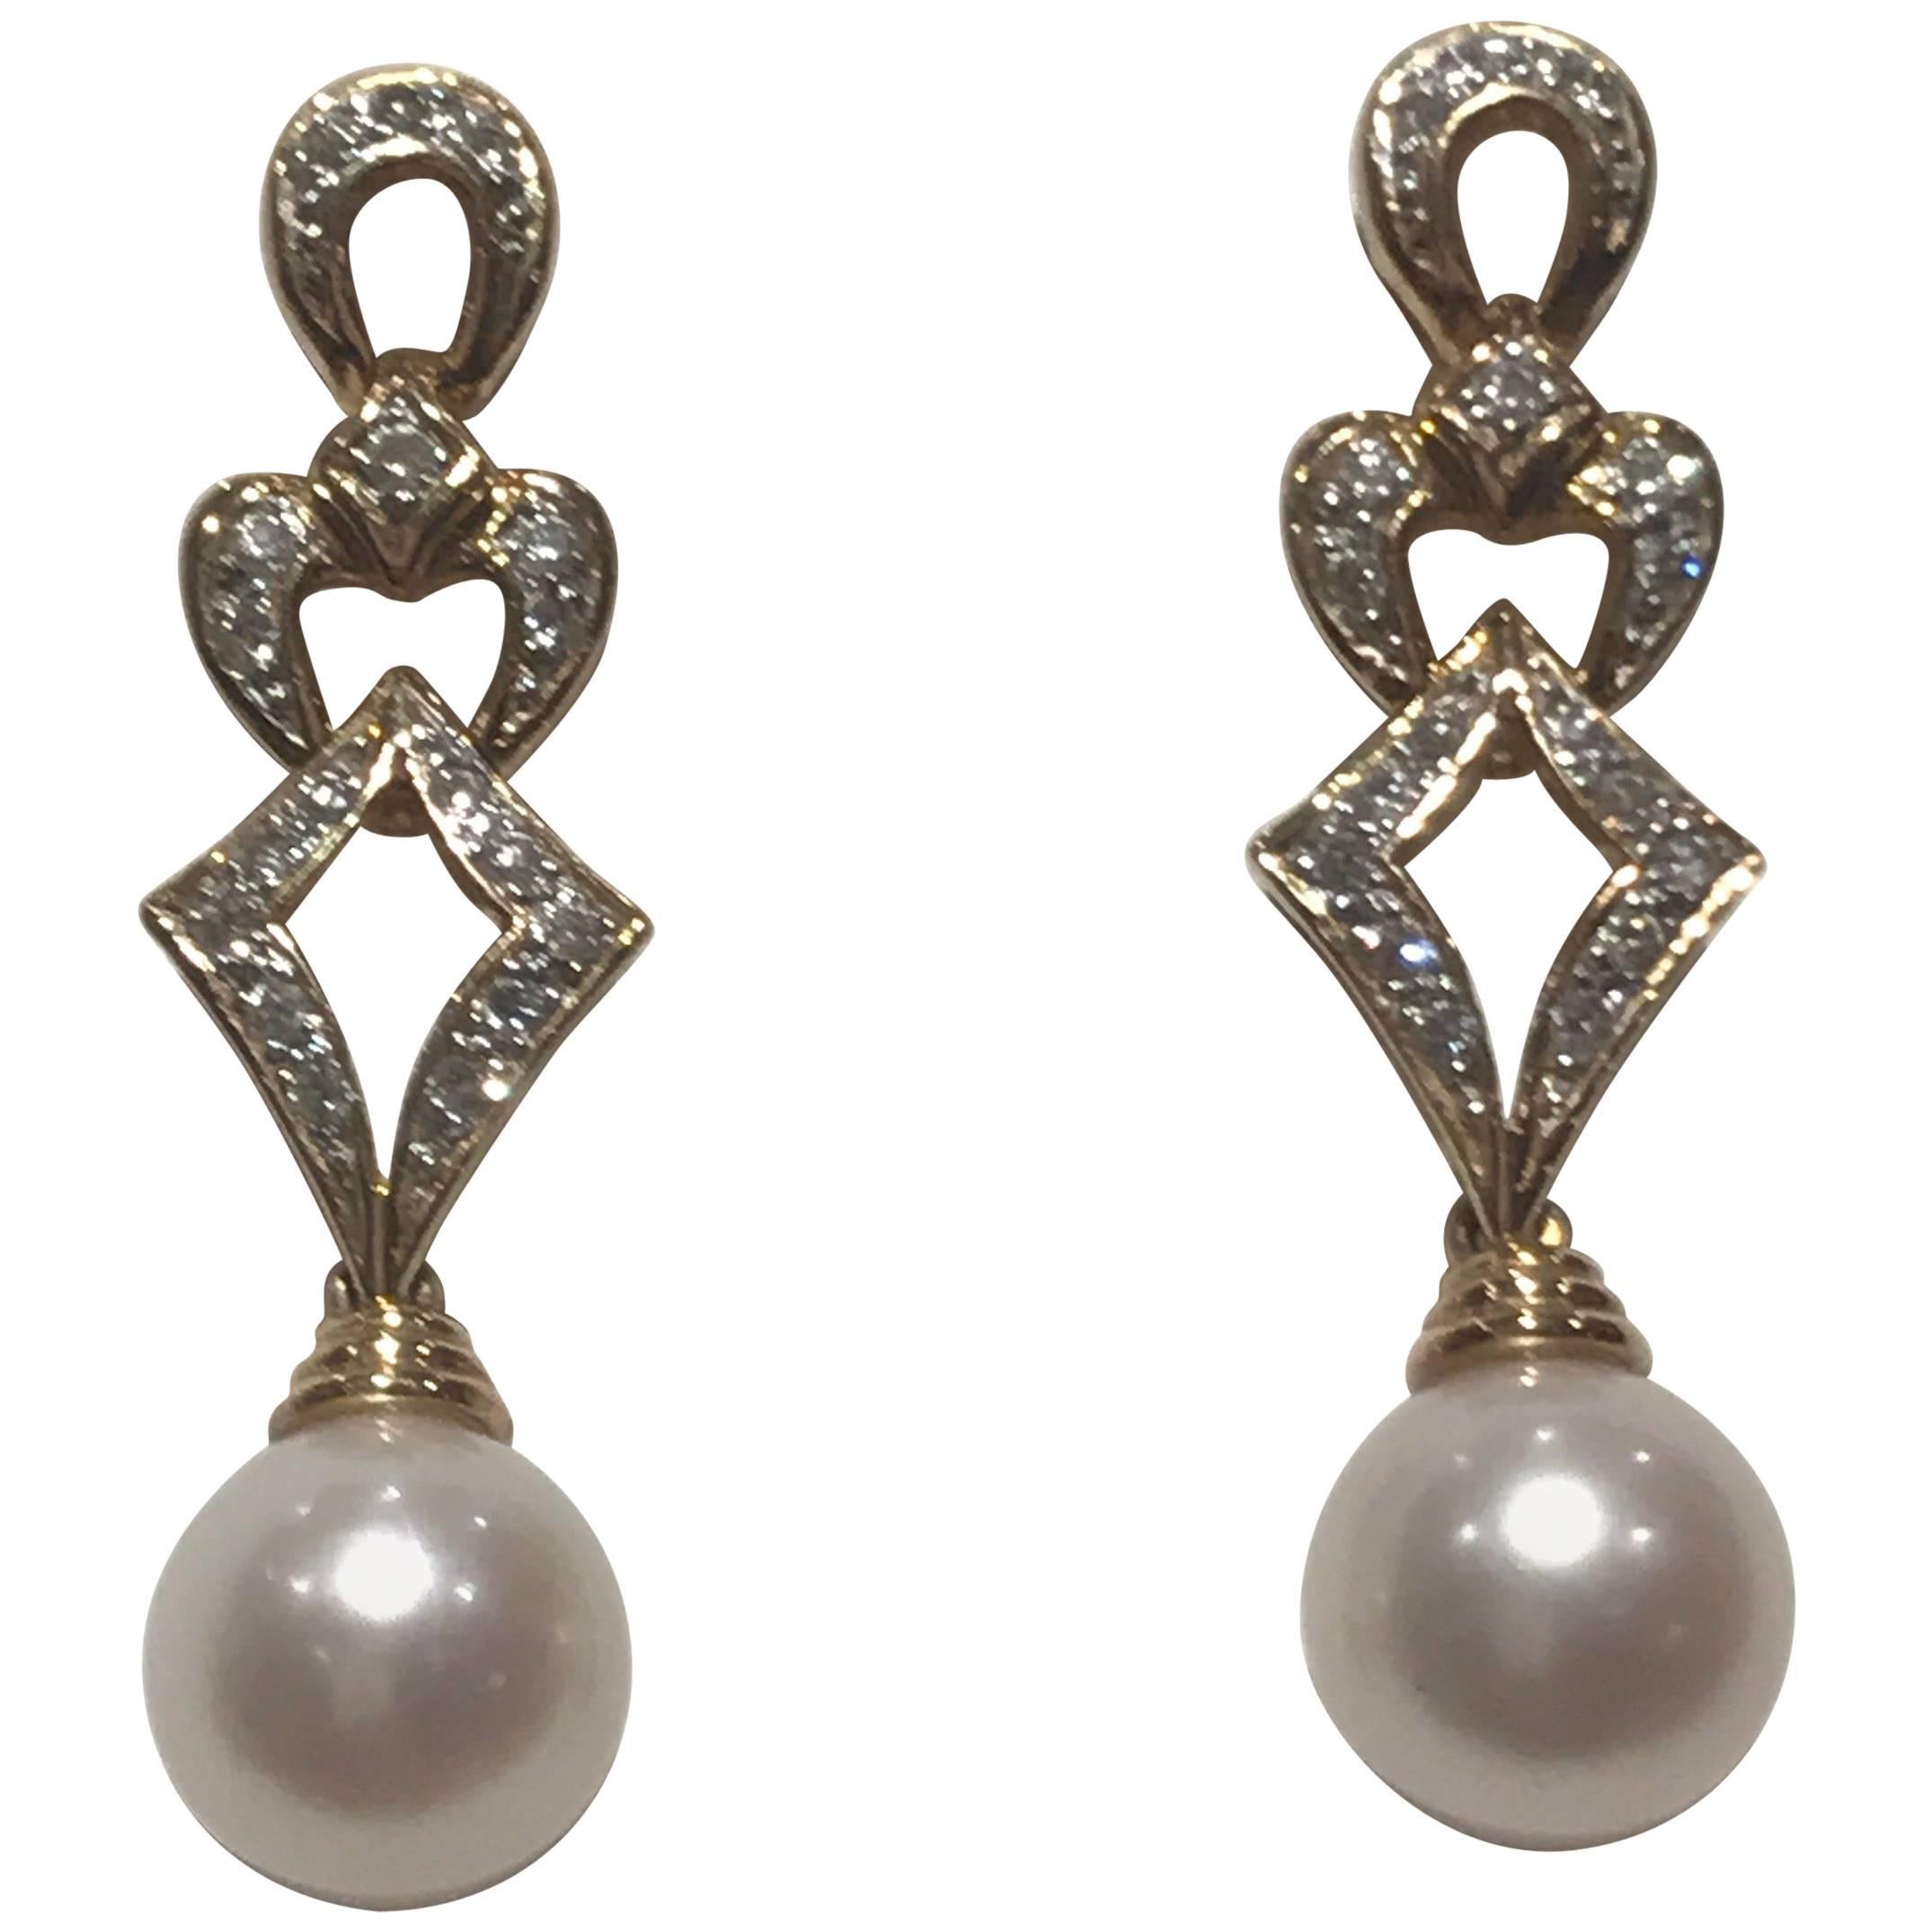 A pair of yellow gold and diamond earrings with a cultured pearl drop set in yellow gold, the earrings are hallmarked for 18k gold and have diamonds which are estimated to weigh about 0.3cts. The diamonds are bright and of good colour and clarity